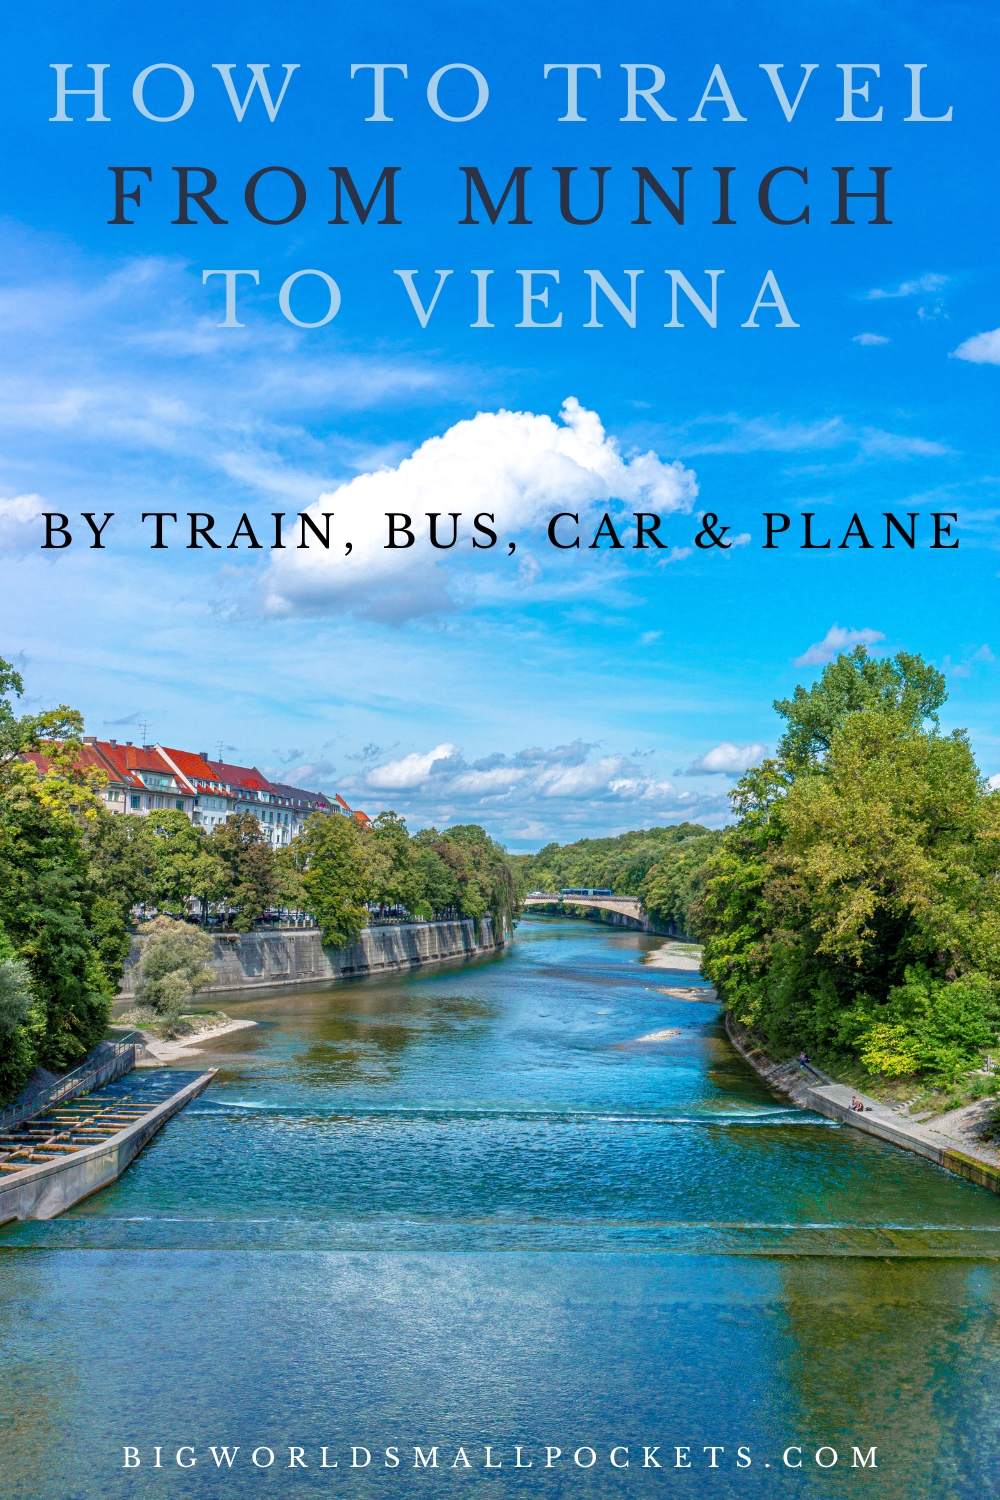 How to Travel from Munich in Germany to Vienna in Austria